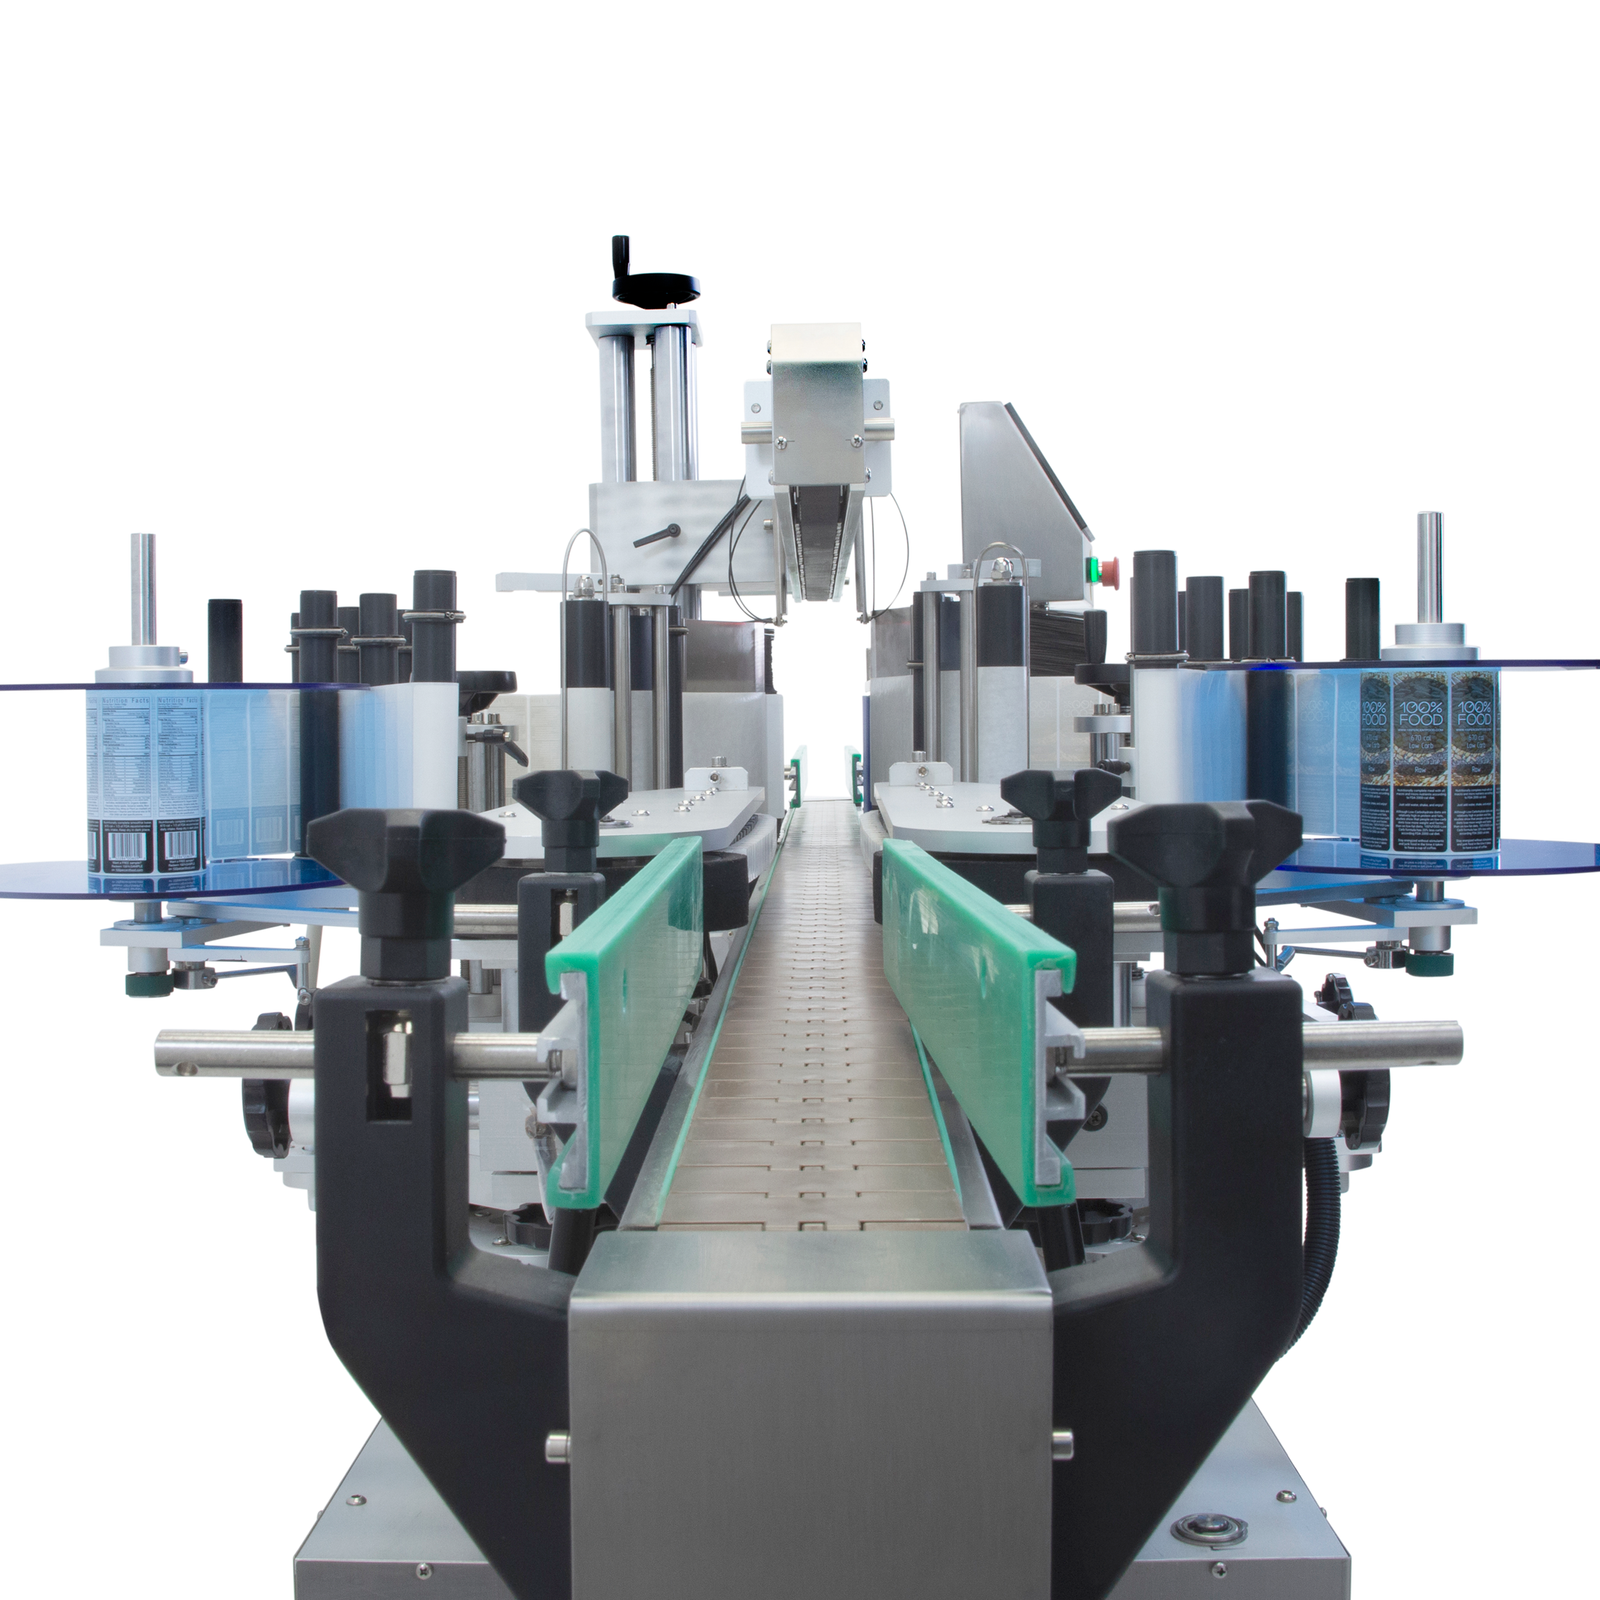 Flat chain conveyor on the dual automatic label applicator for round and flat containers by JORES TECHNOLOGIES®